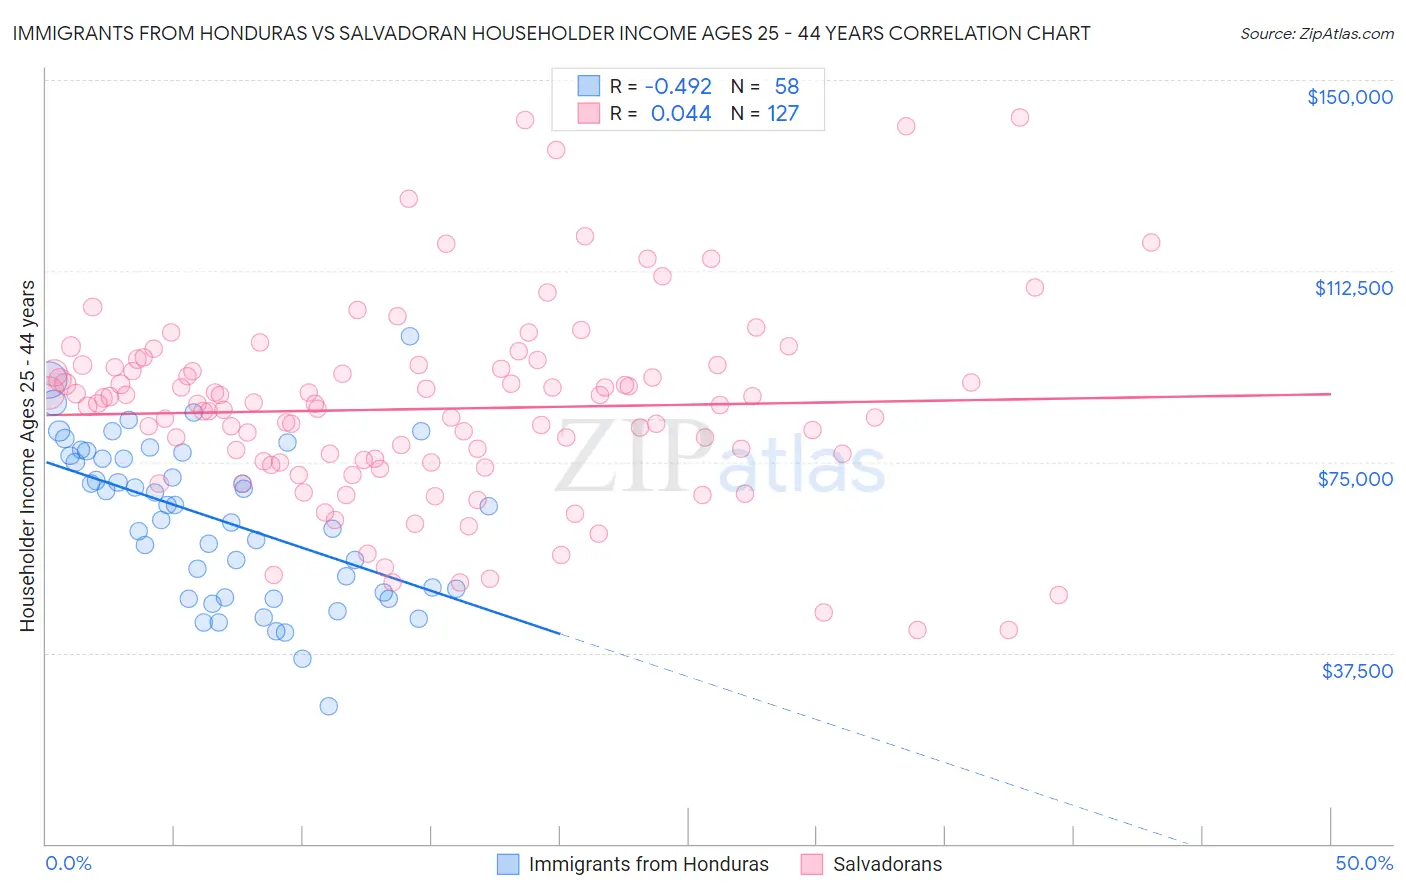 Immigrants from Honduras vs Salvadoran Householder Income Ages 25 - 44 years